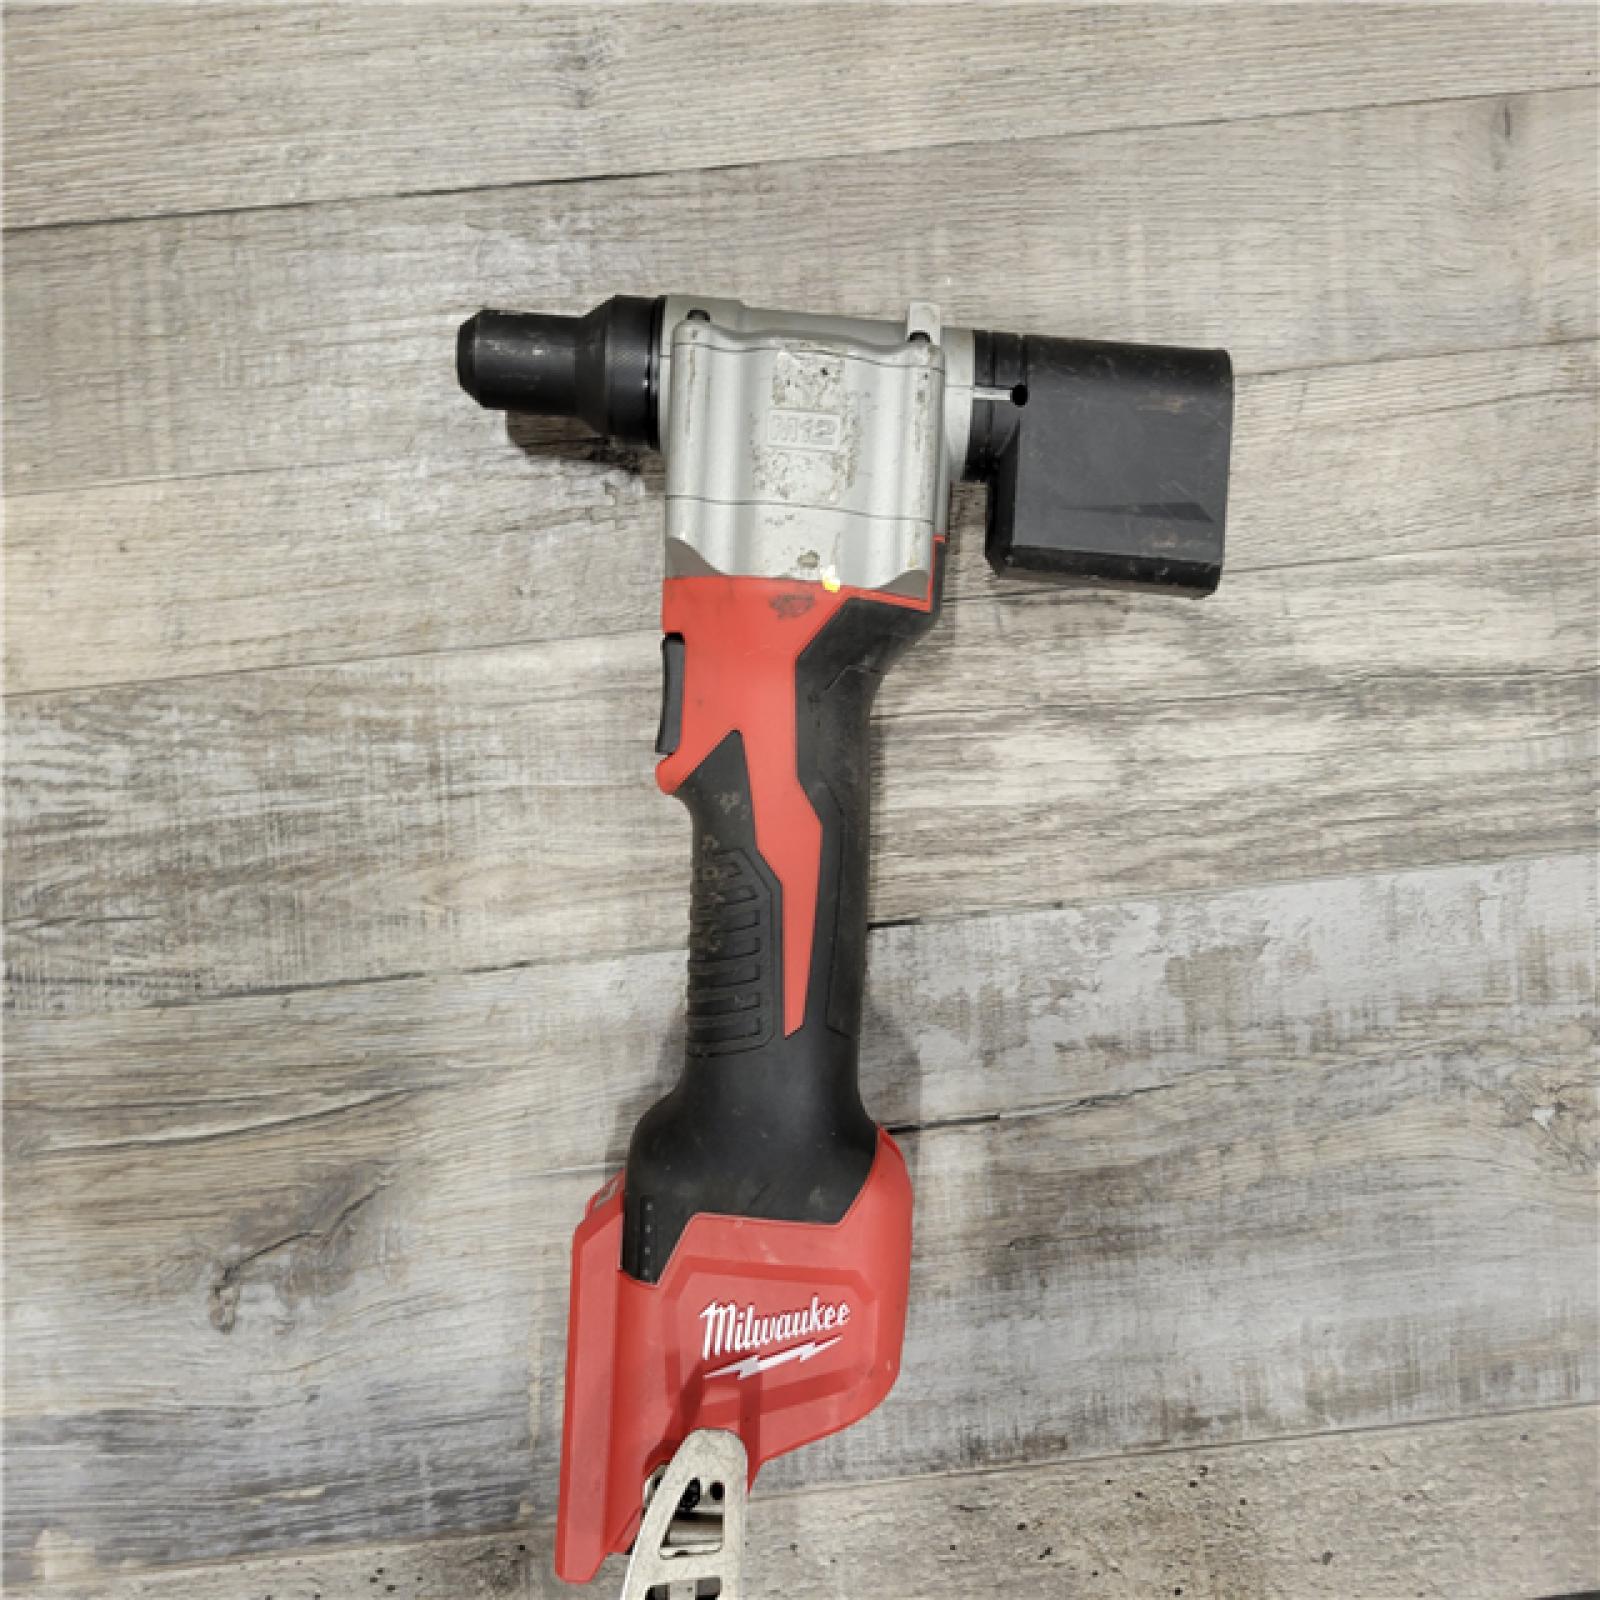 AS-IS M12 12-Volt Lithium-Ion Cordless Rivet Tool (Tool-Only)